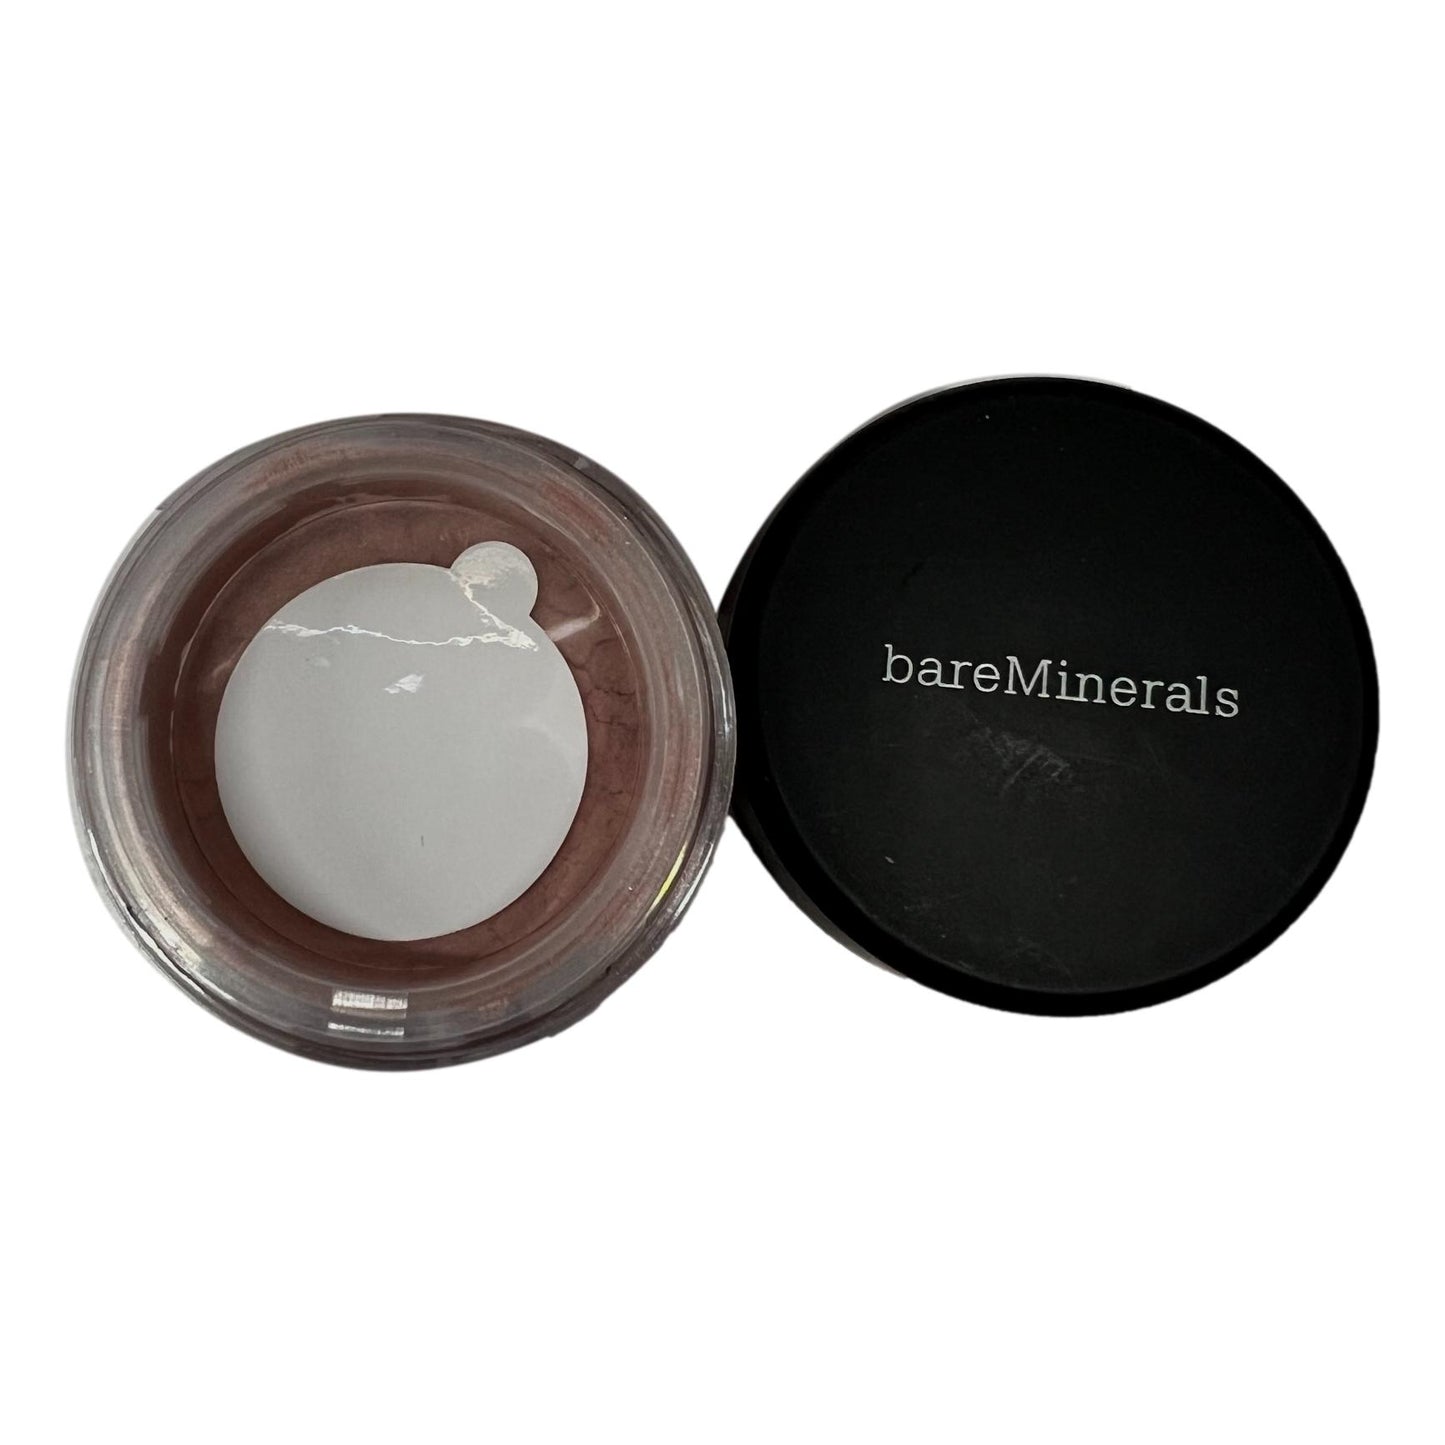 bareMinerals All Over Face Colour Glee Radiance (0.85g)